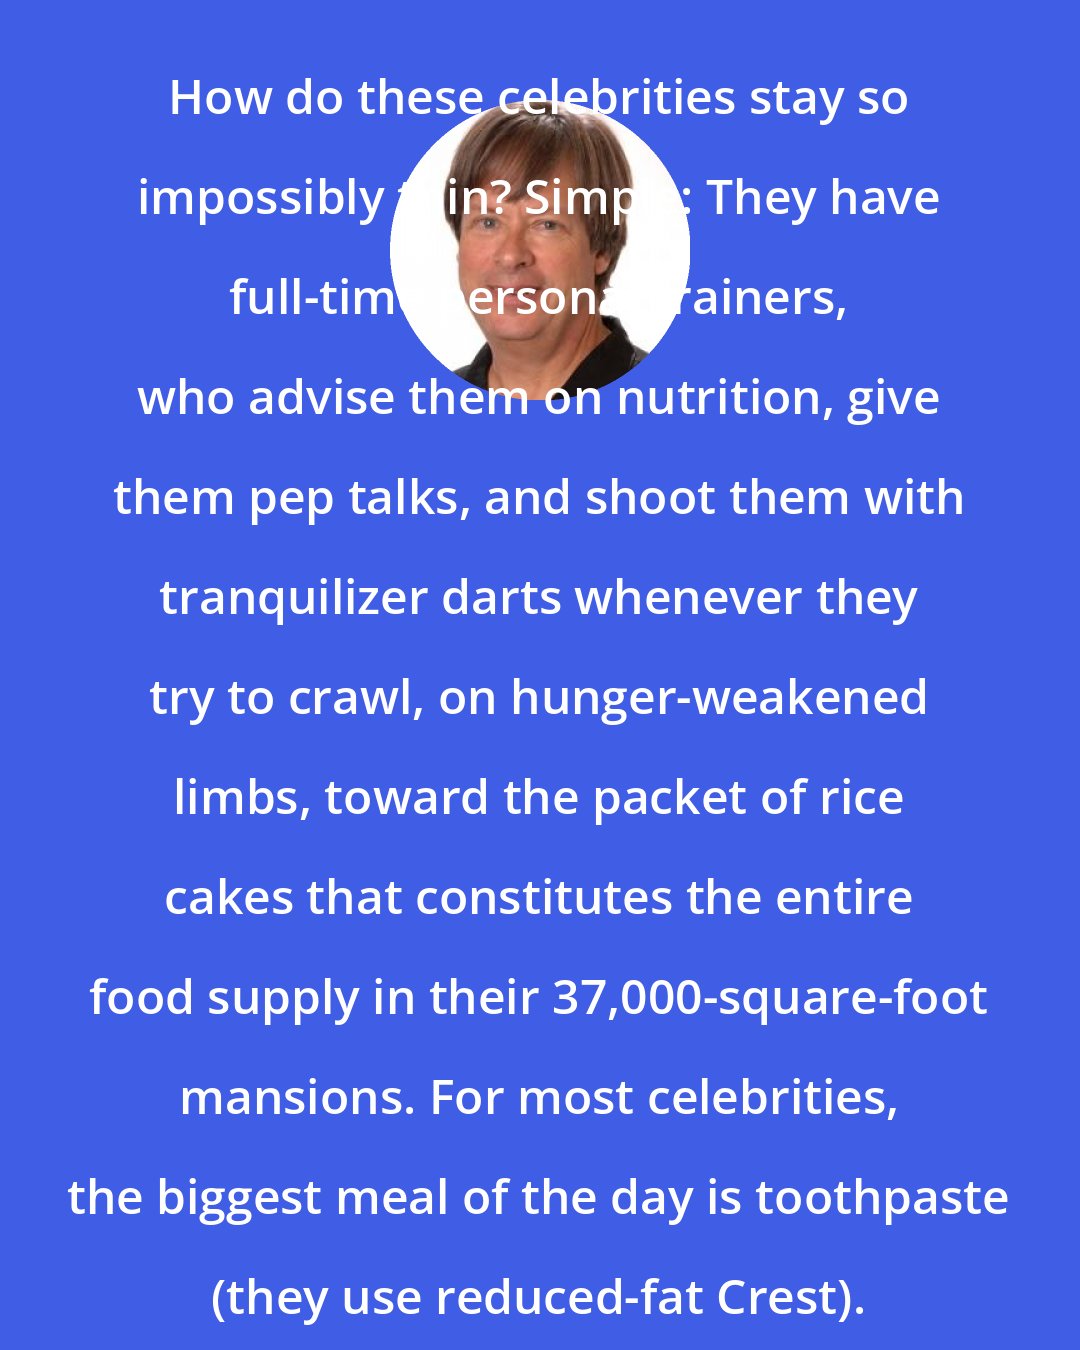 Dave Barry: How do these celebrities stay so impossibly thin? Simple: They have full-time personal trainers, who advise them on nutrition, give them pep talks, and shoot them with tranquilizer darts whenever they try to crawl, on hunger-weakened limbs, toward the packet of rice cakes that constitutes the entire food supply in their 37,000-square-foot mansions. For most celebrities, the biggest meal of the day is toothpaste (they use reduced-fat Crest).